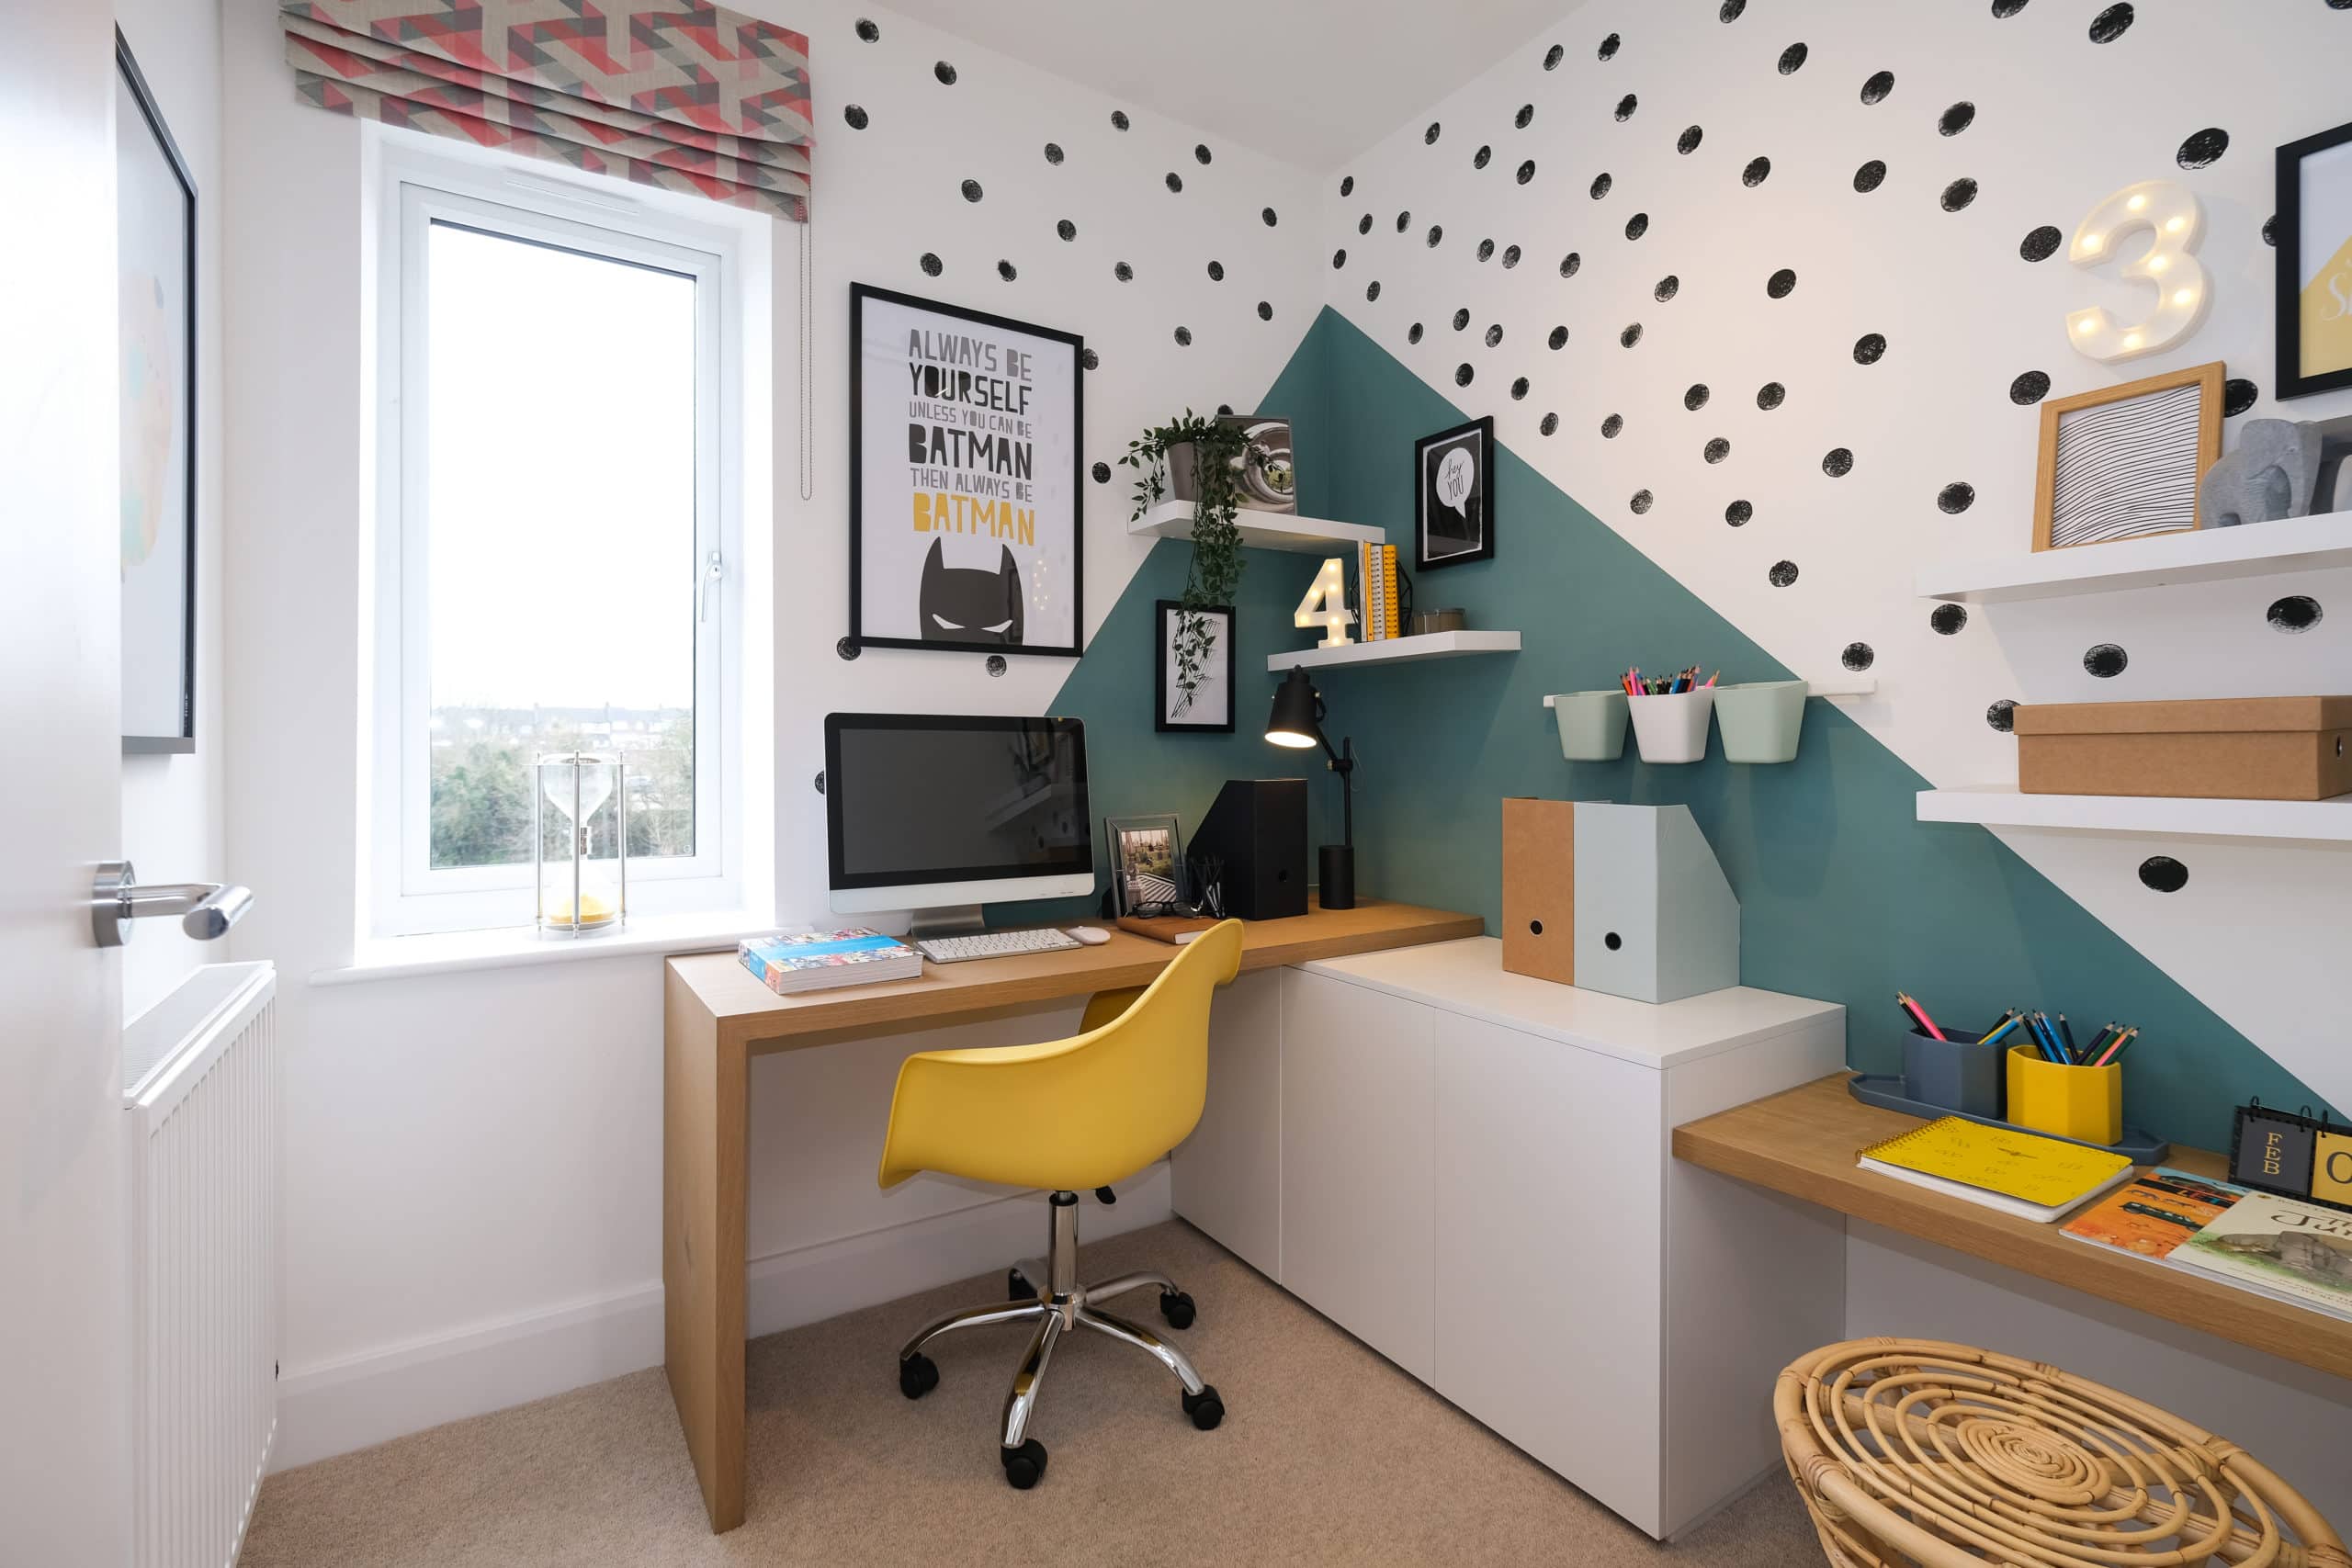 Study area at Catalyst's The Printworks - Shared Ownership homes available on Share to Buy